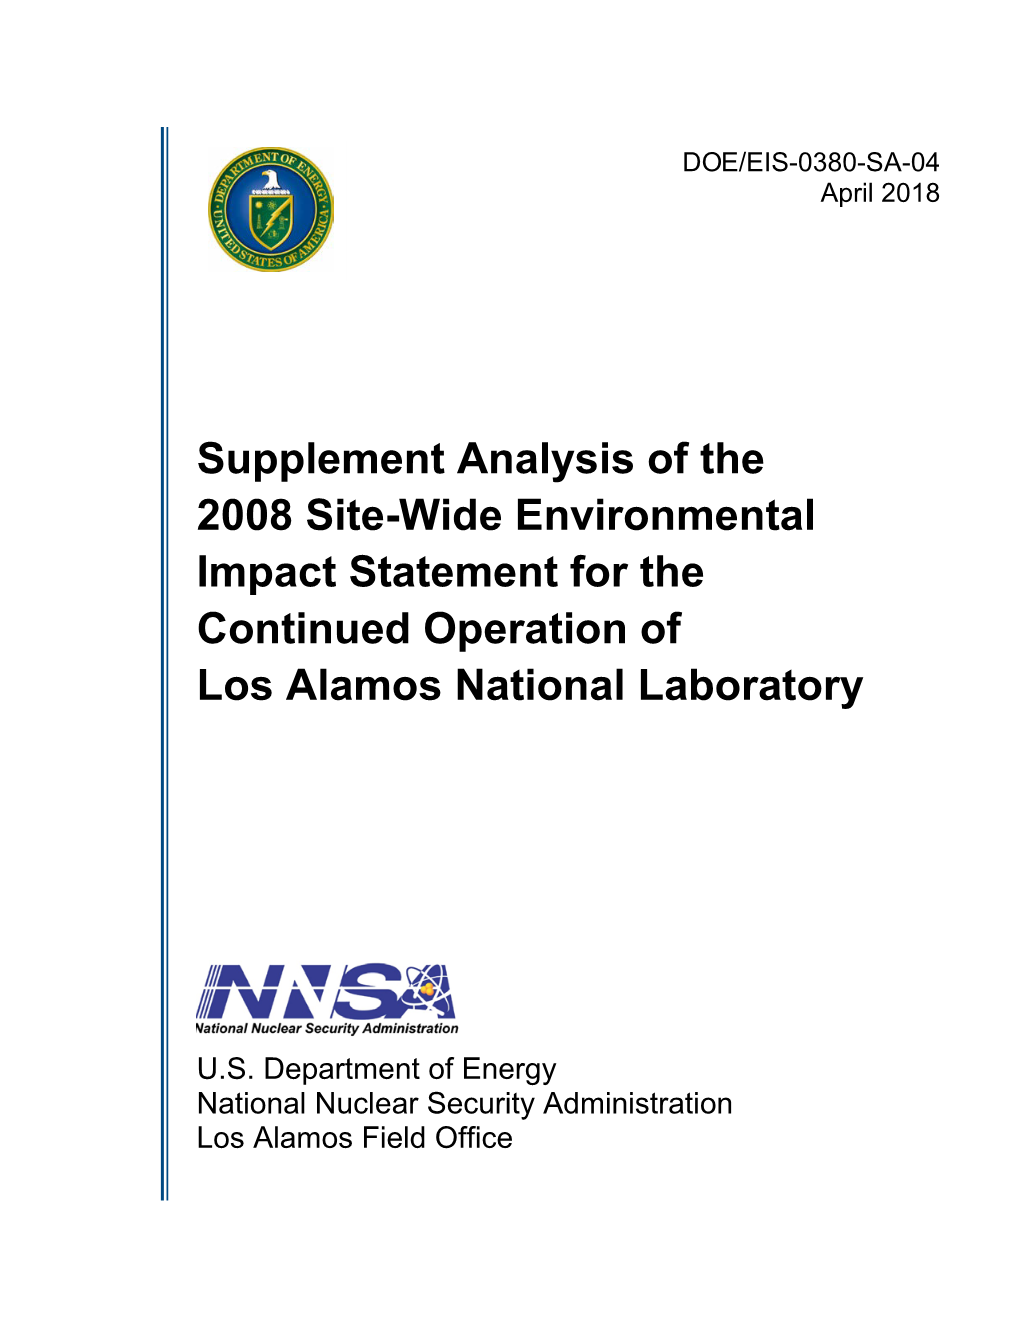 Supplement Analysis of the 2008 Site-Wide Environmental Impact Statement for the Continued Operation of Los Alamos National Laboratory